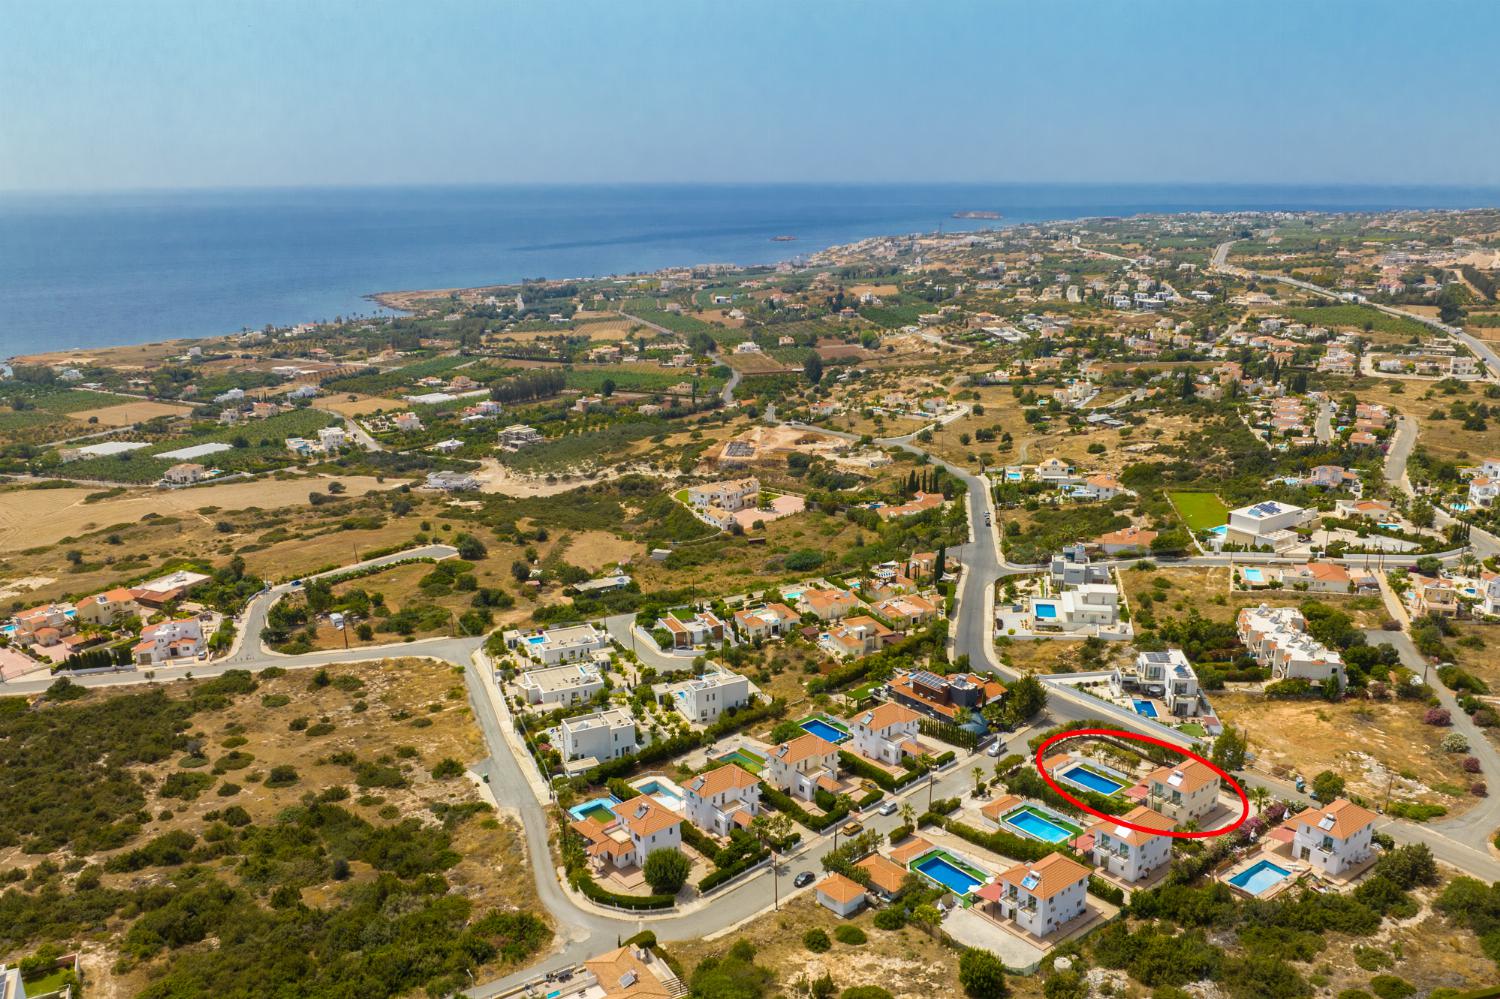 Aerial view showing location of Villa Archimedes